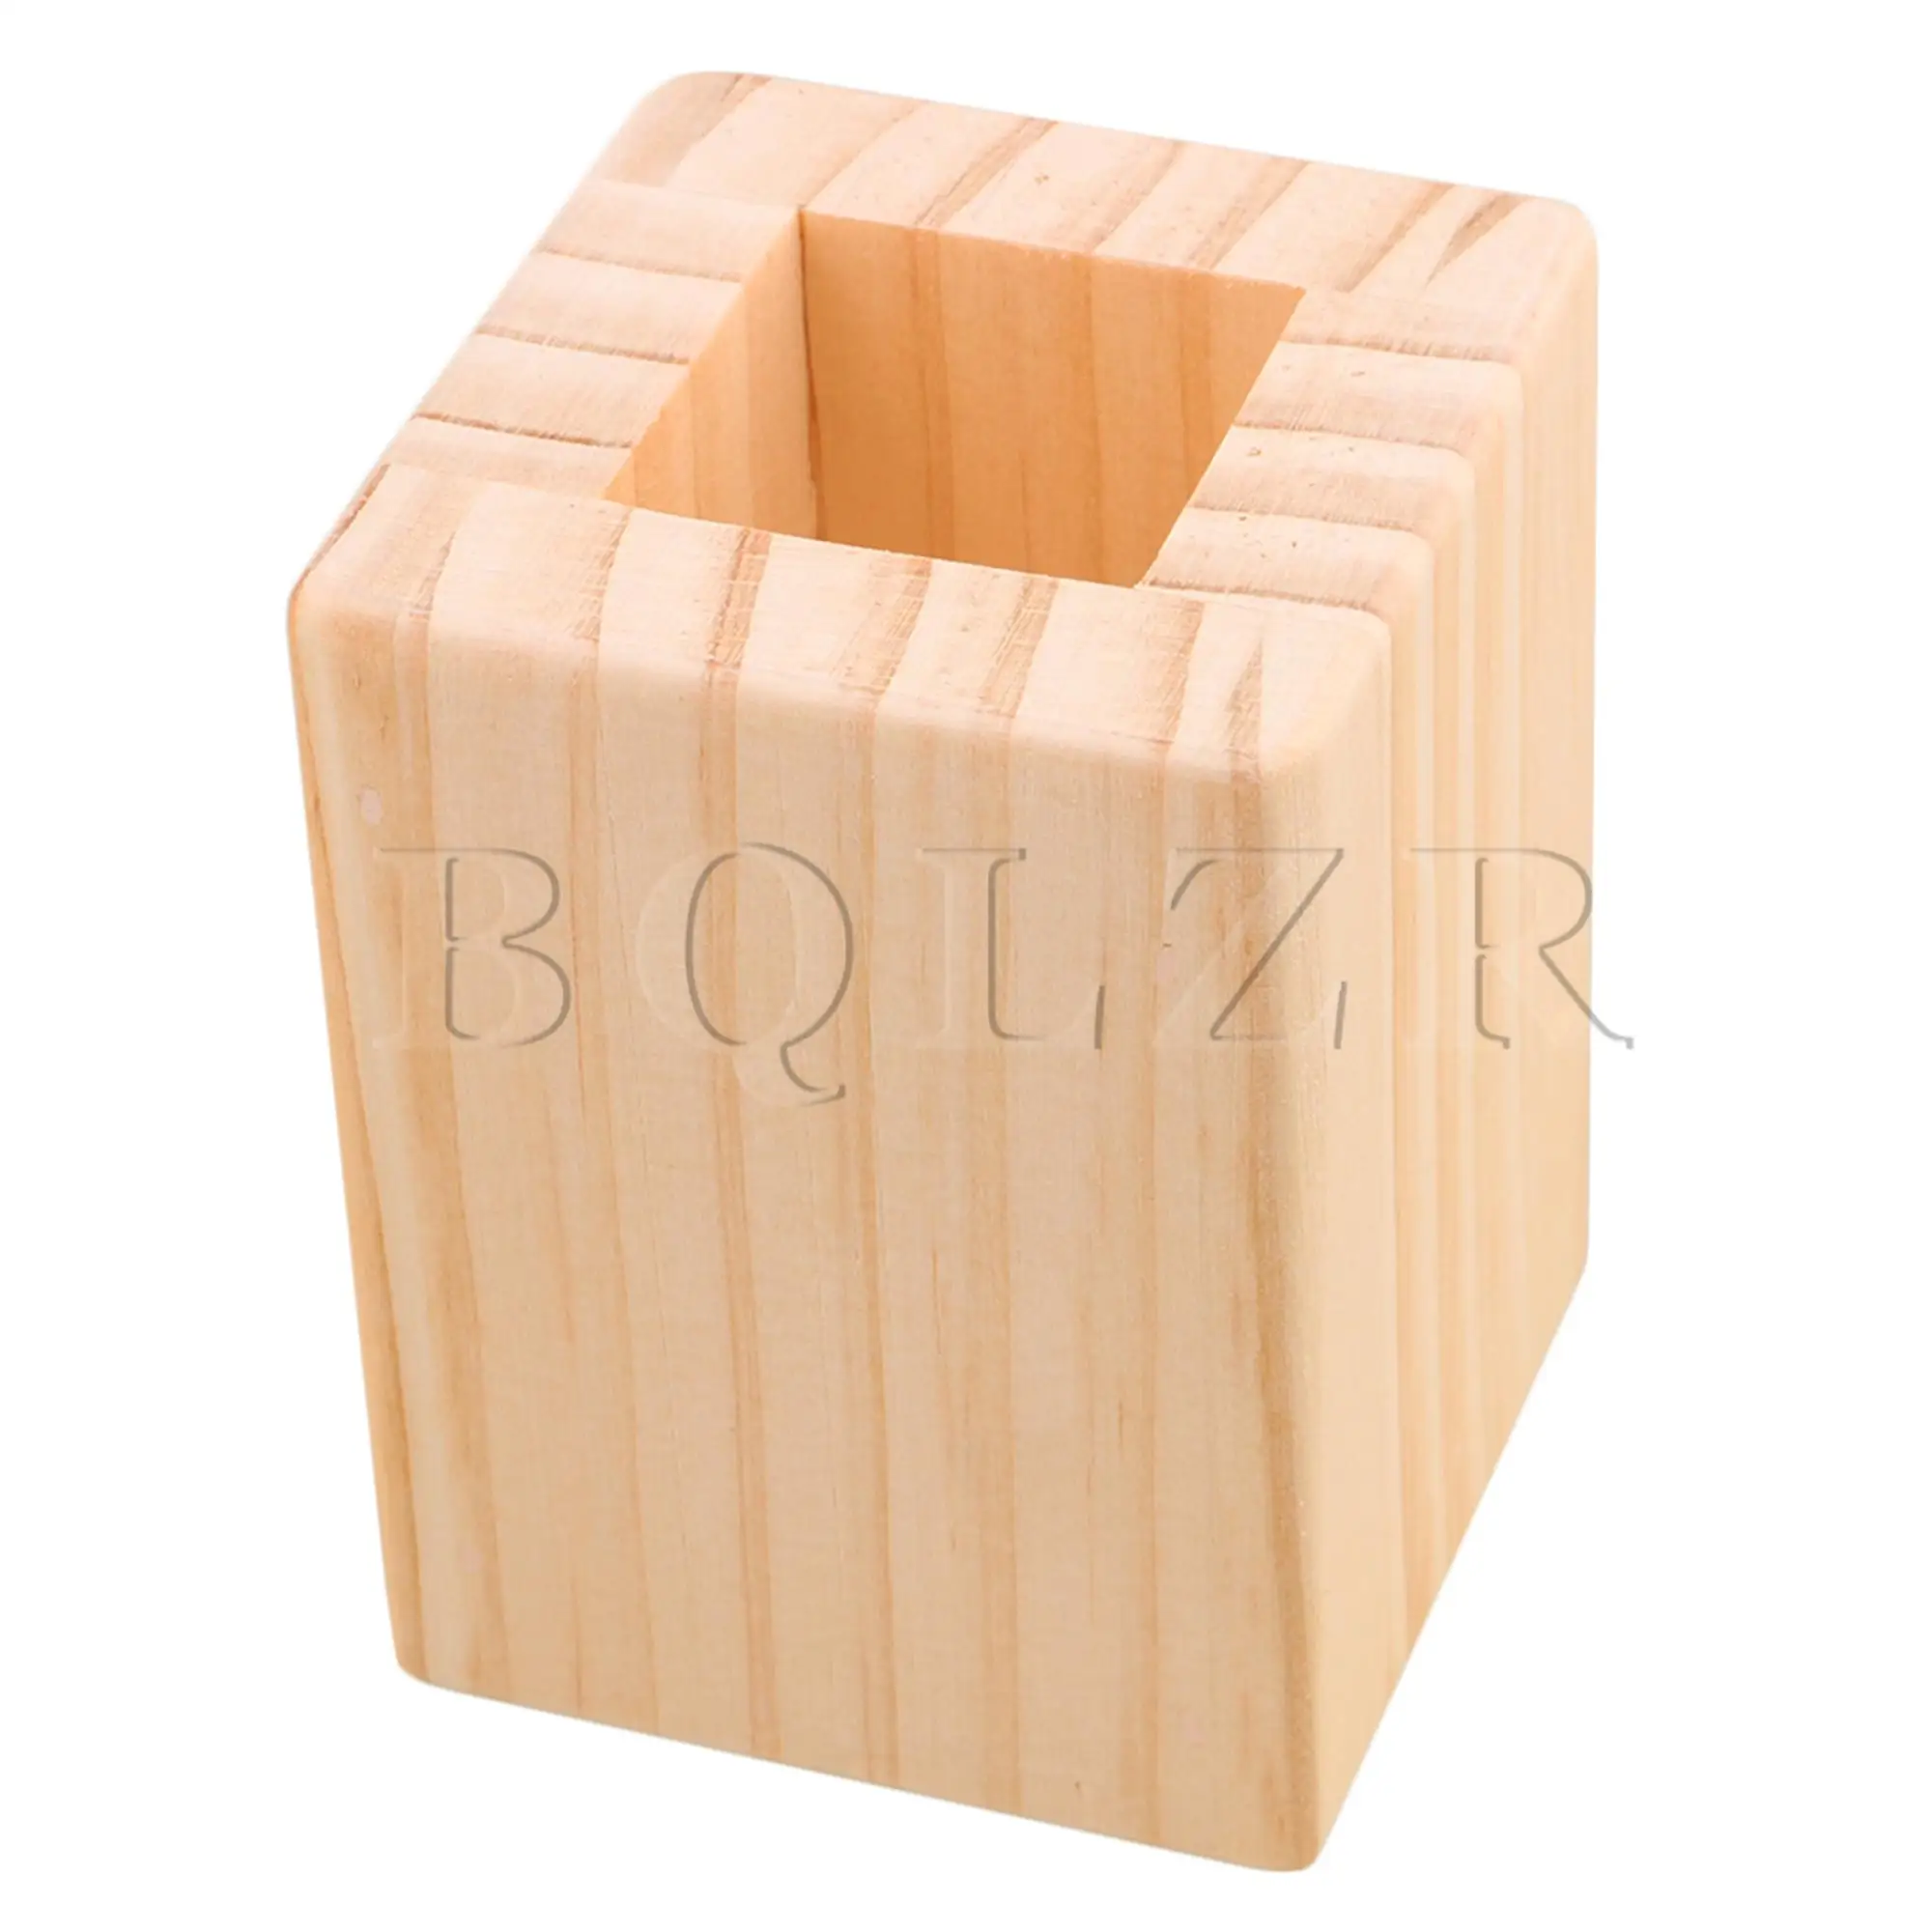 3cm Closed Square Hole Wood Furniture Lifter Bed Table Riser Add 5cm 